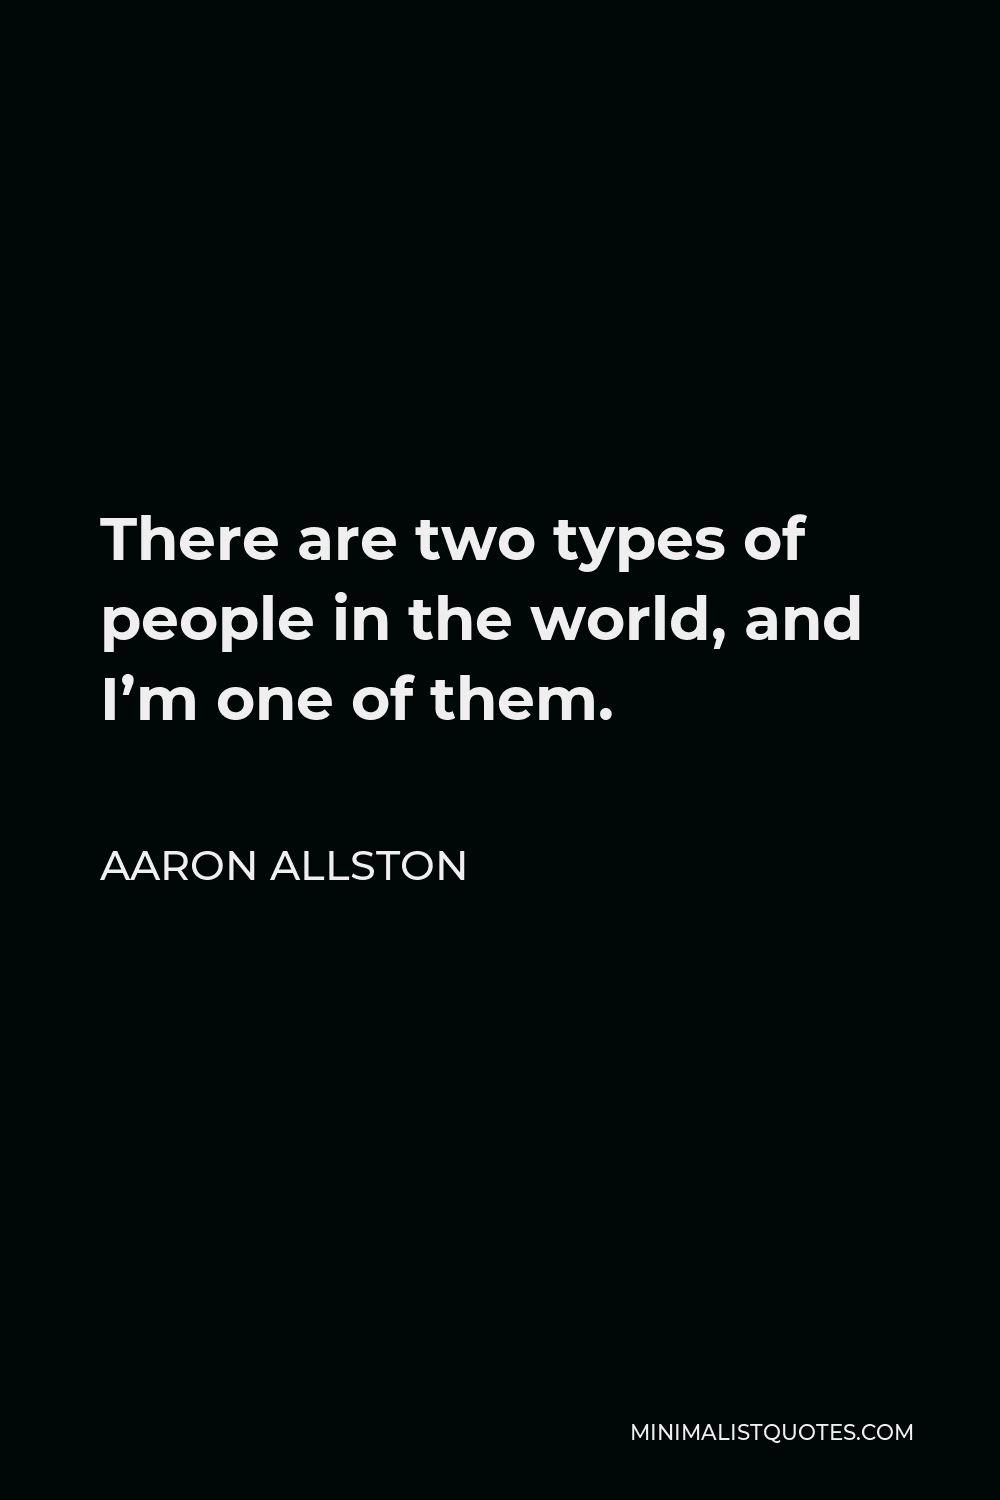 Aaron Allston Quote - There are two types of people in the world, and I’m one of them.